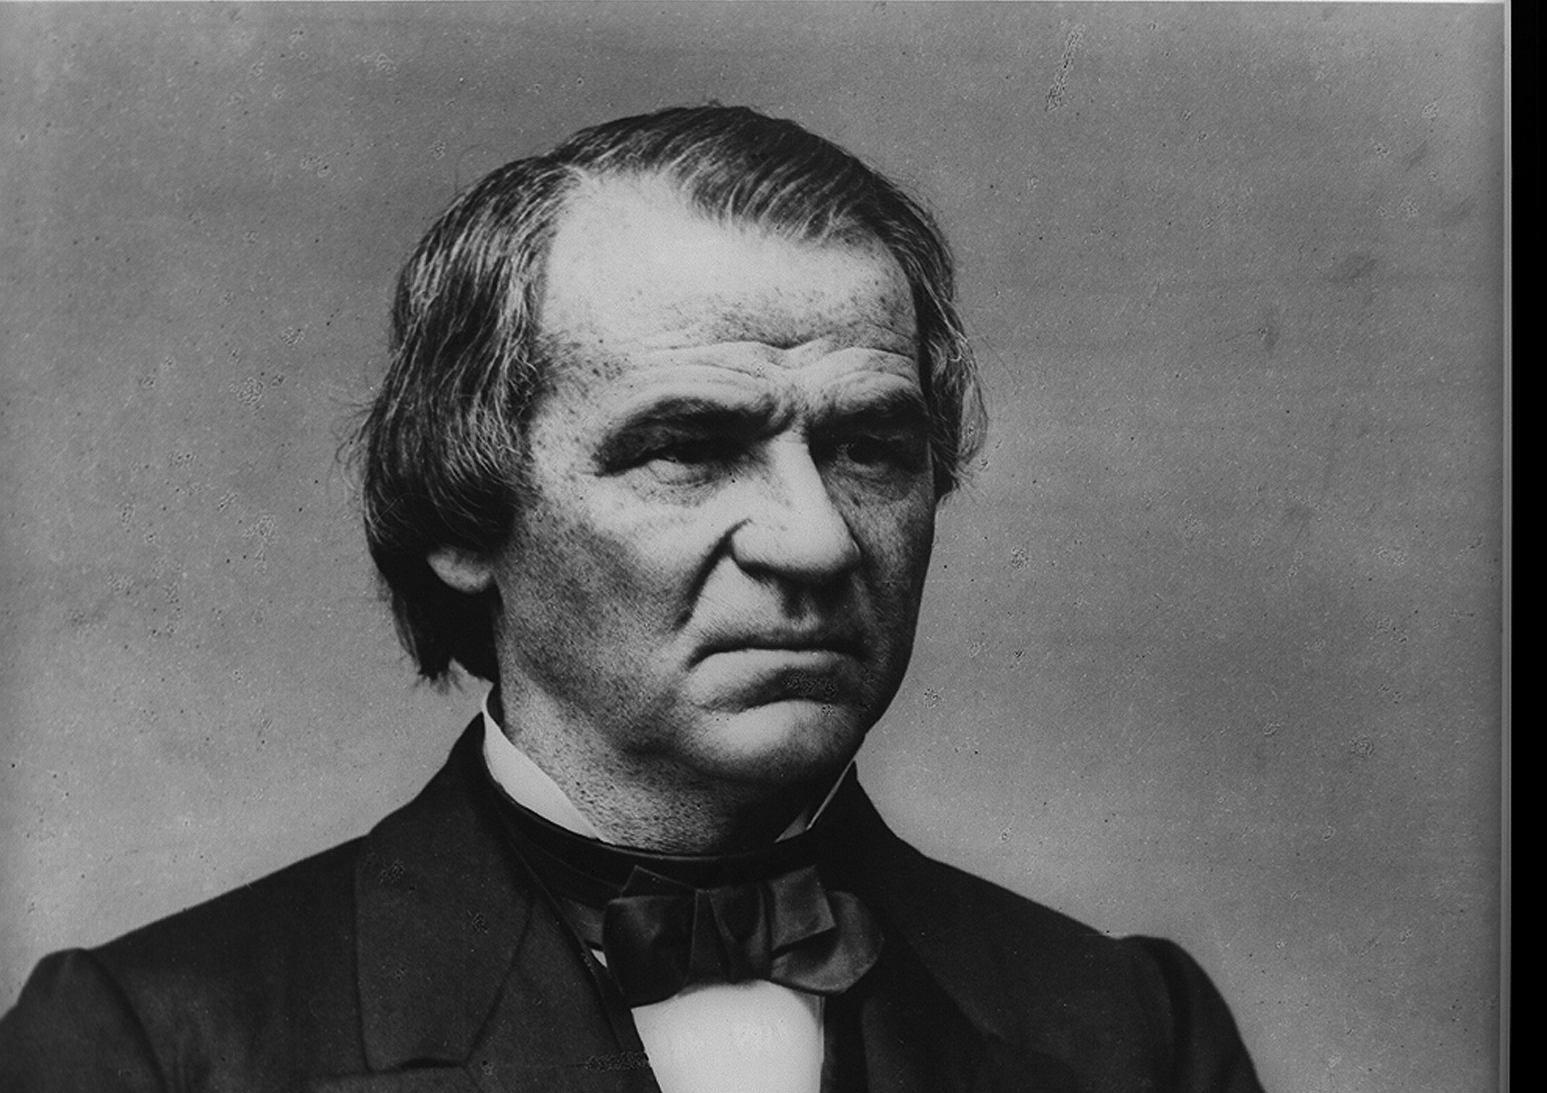 Andrew Johnson, 17th president of the United States.